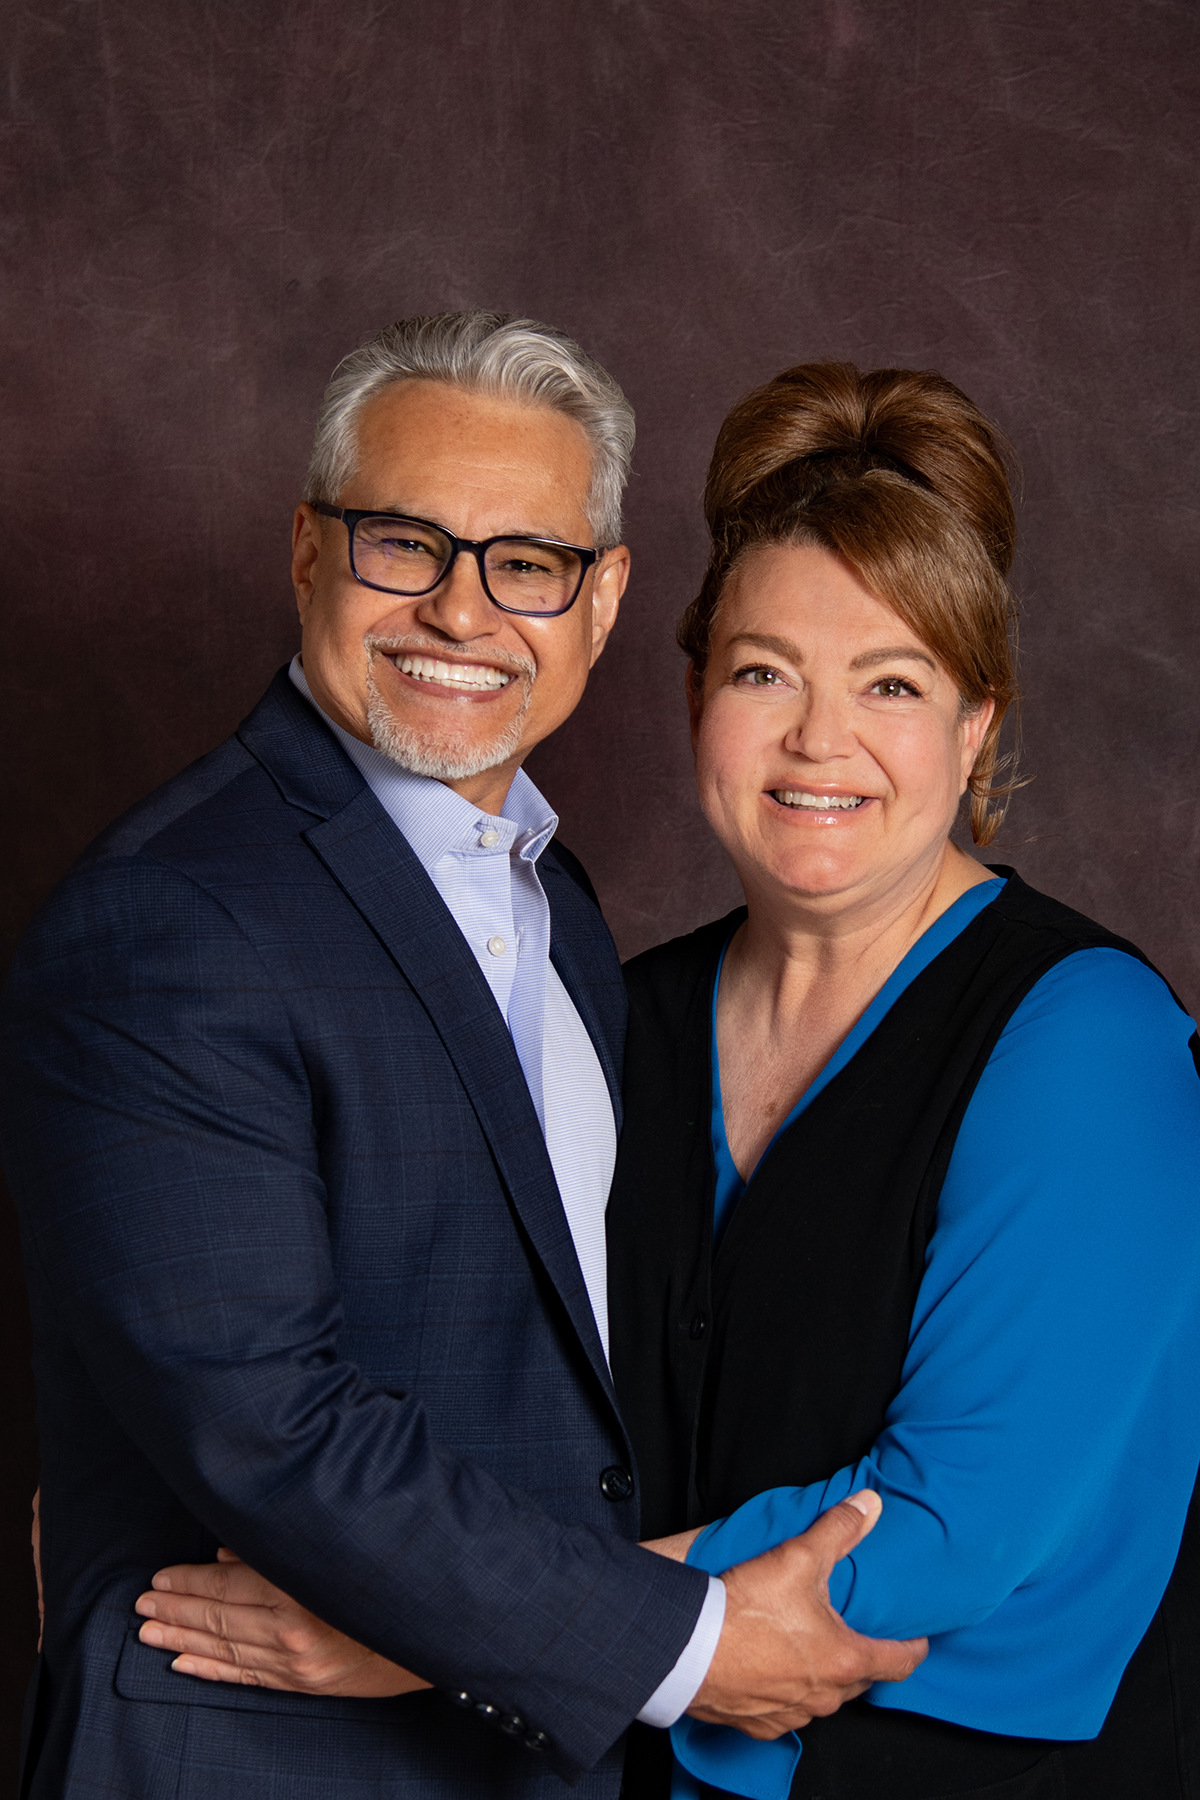 A smiling Hispanic couple pose for a formal photo with arms around each other